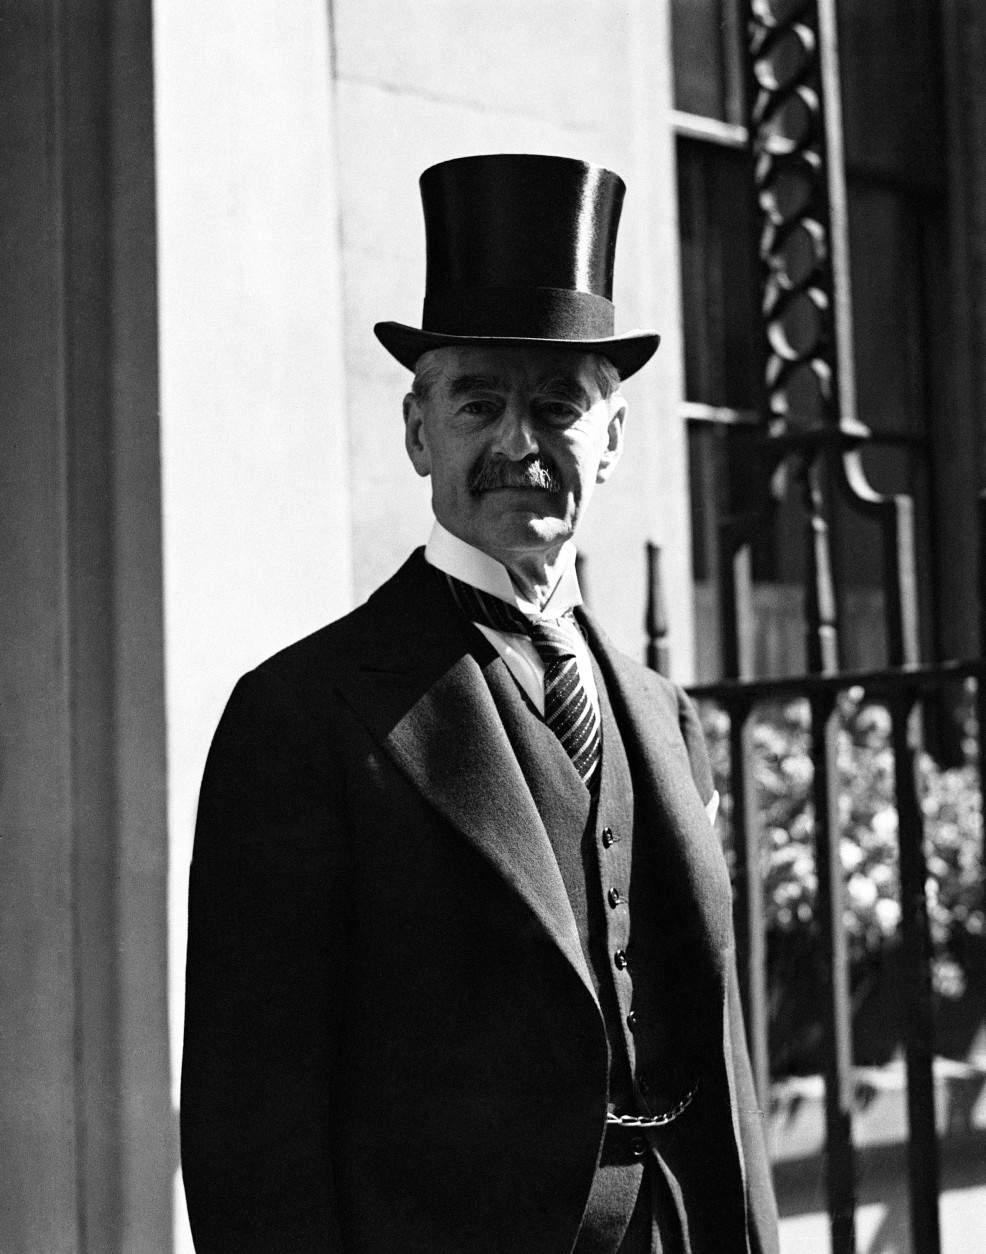 Neville Chamberlain, Chancellor of the Exchequer photographed returning to No. 11 Downing Street, London after he had an audience with King George VI on the day that Stanley Baldwin resigned as Prime Minister on May 28, 1937. It is expected that he will become the new Prime Minister of Britain. (AP Photo/Staff/Putnam)